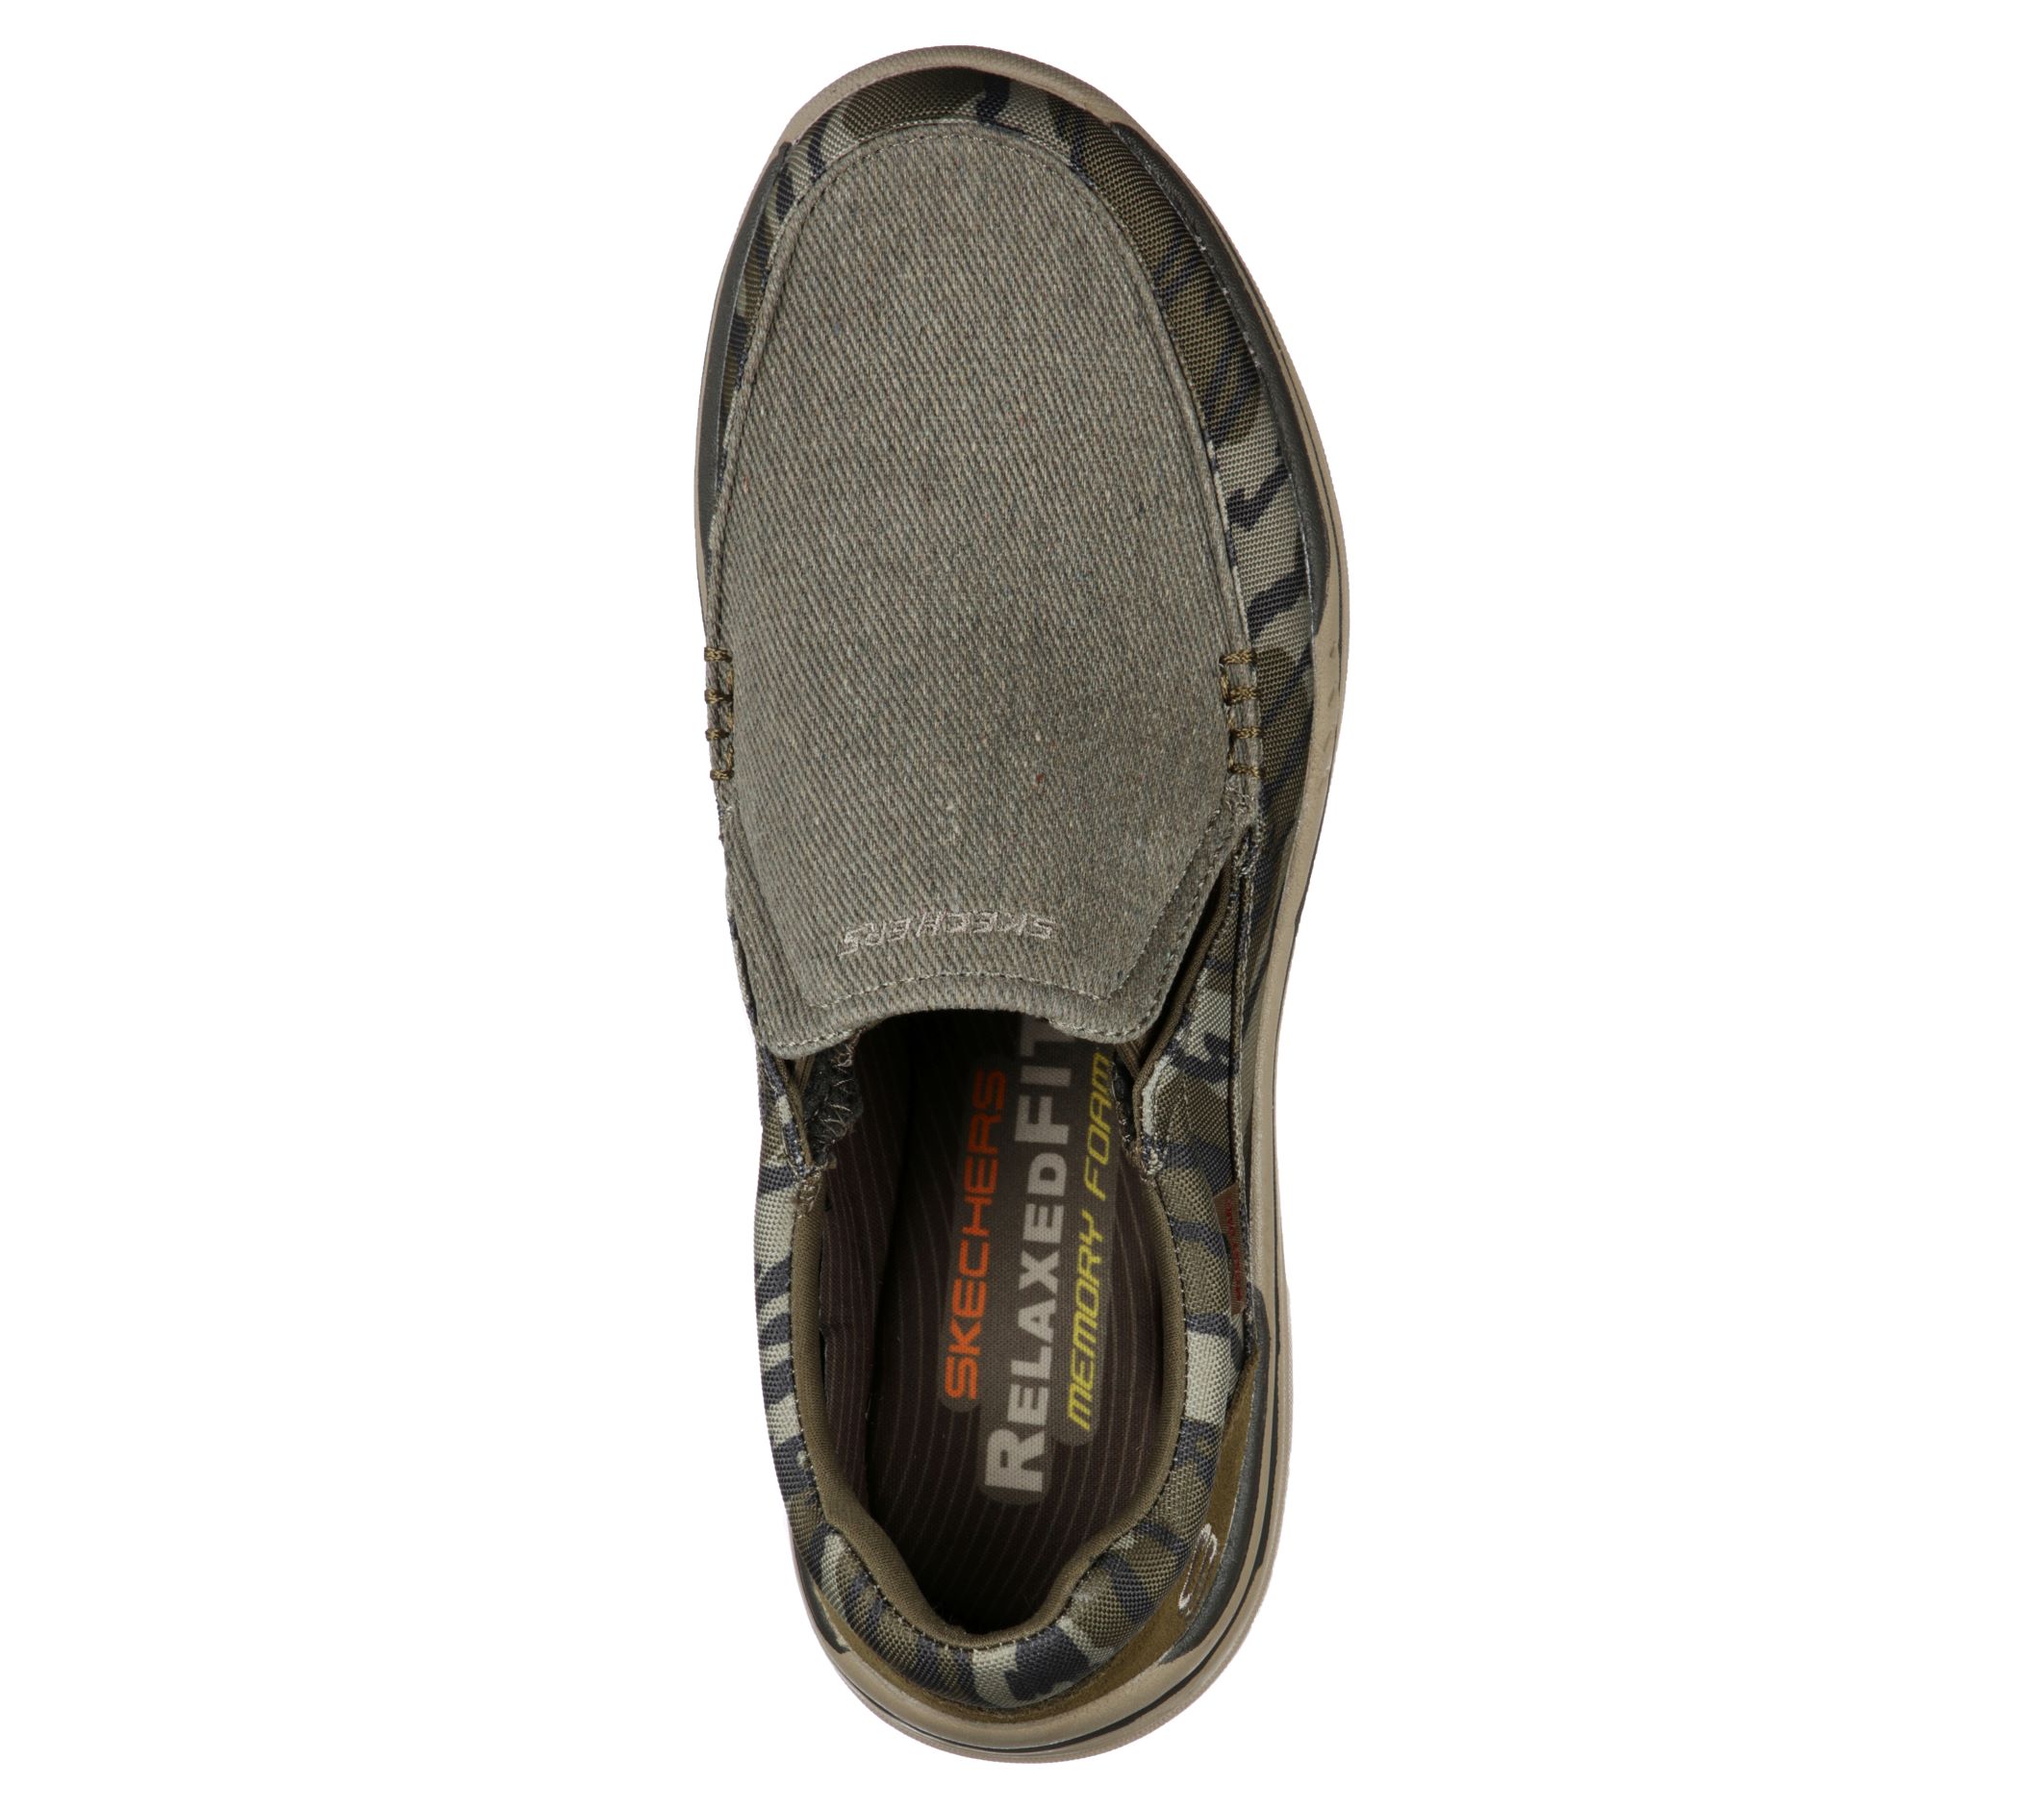 Skechers Men's Relaxed Fit Expected Avillo Casual Slip-on Shoe (Wide Width Available) - image 3 of 5